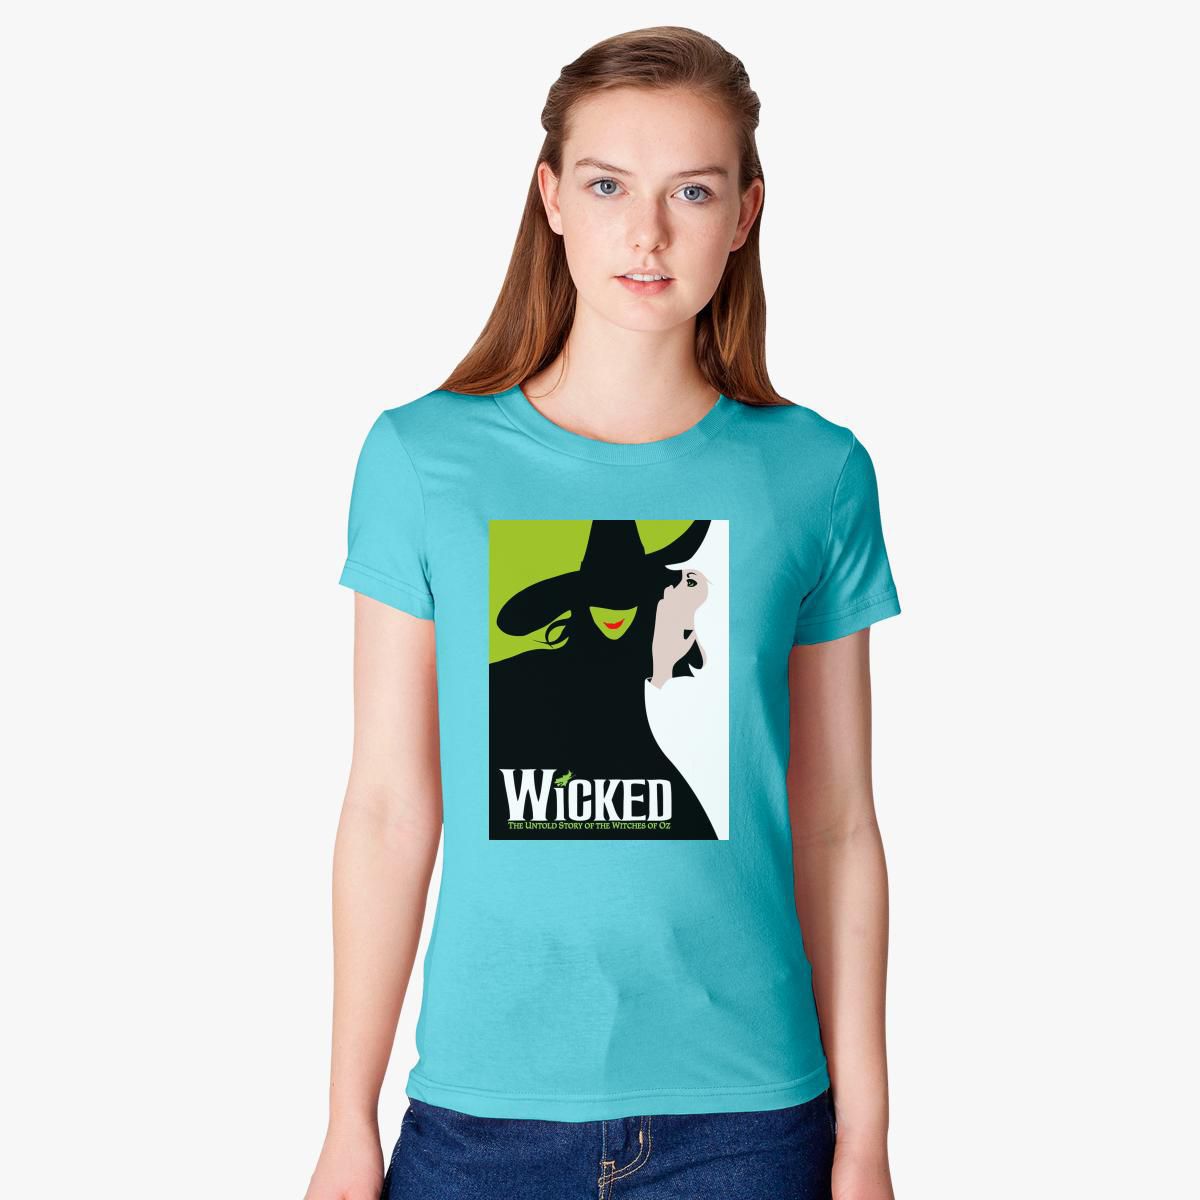 Wicked the Broadway Musical - Ladies Logo Vee Neck T-Shirt - Wicked